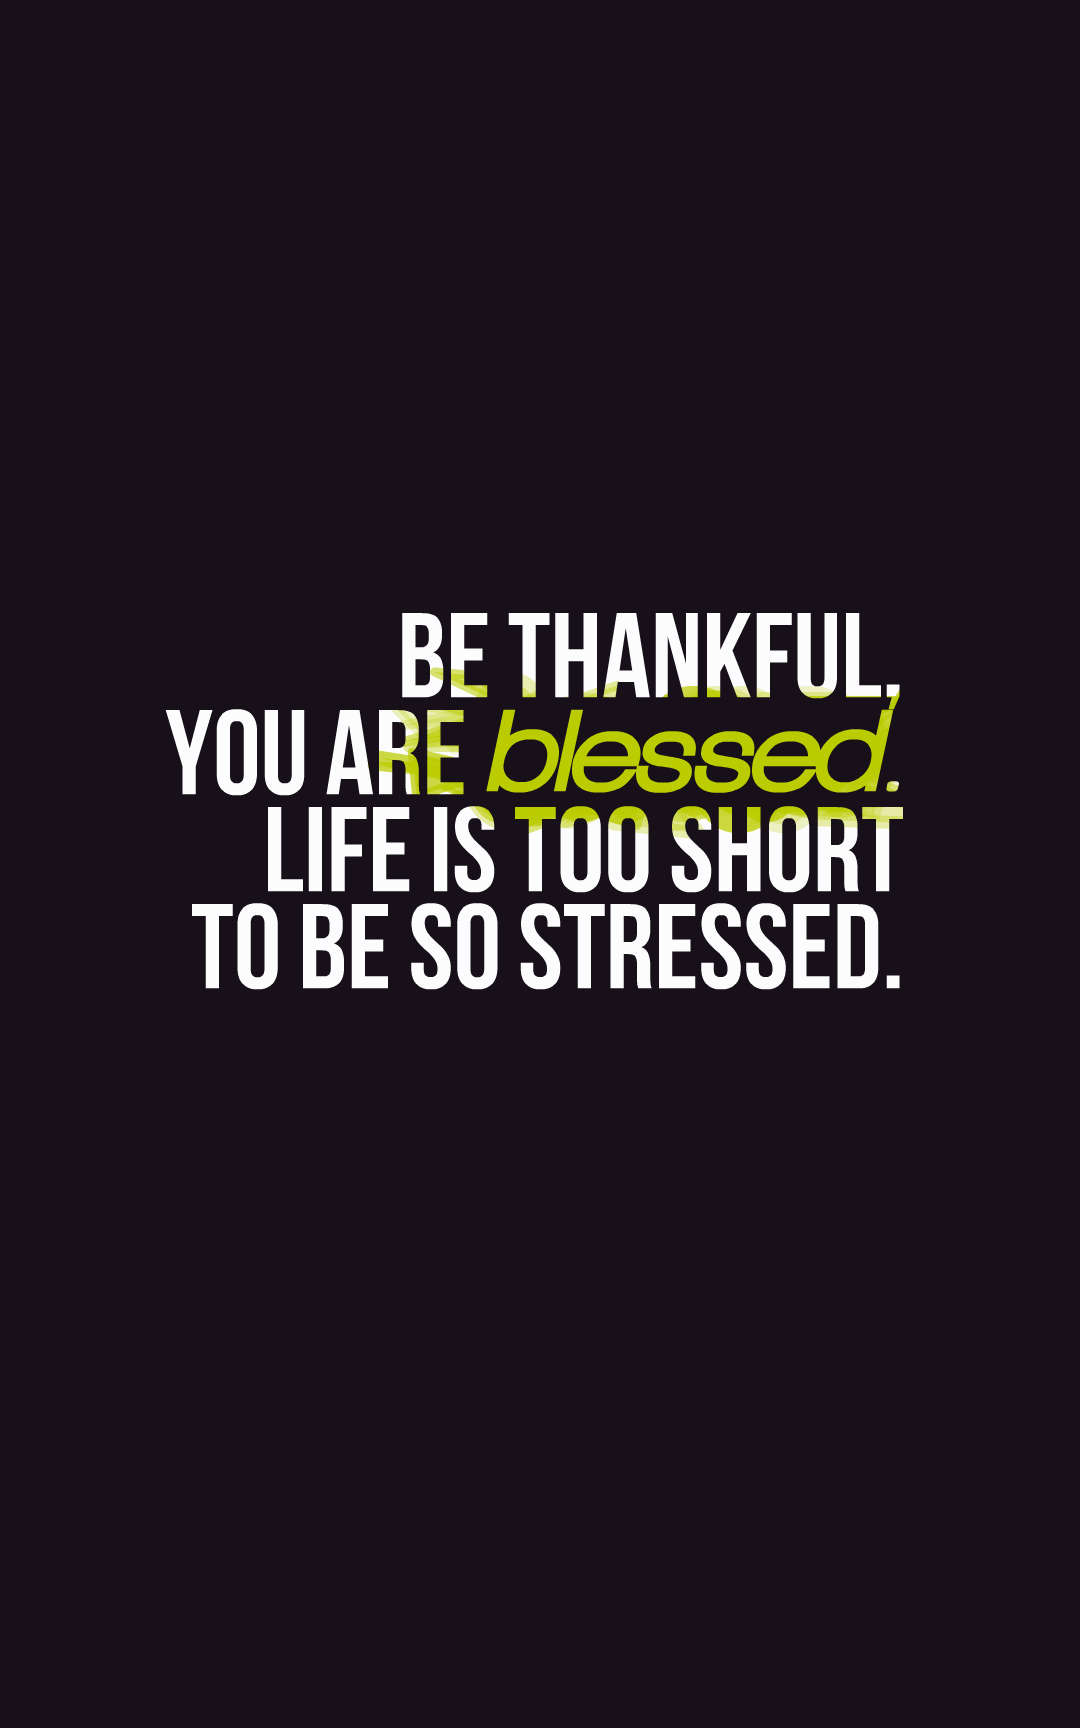 Be thankful you are blessed. Life is too short to be so stressed.